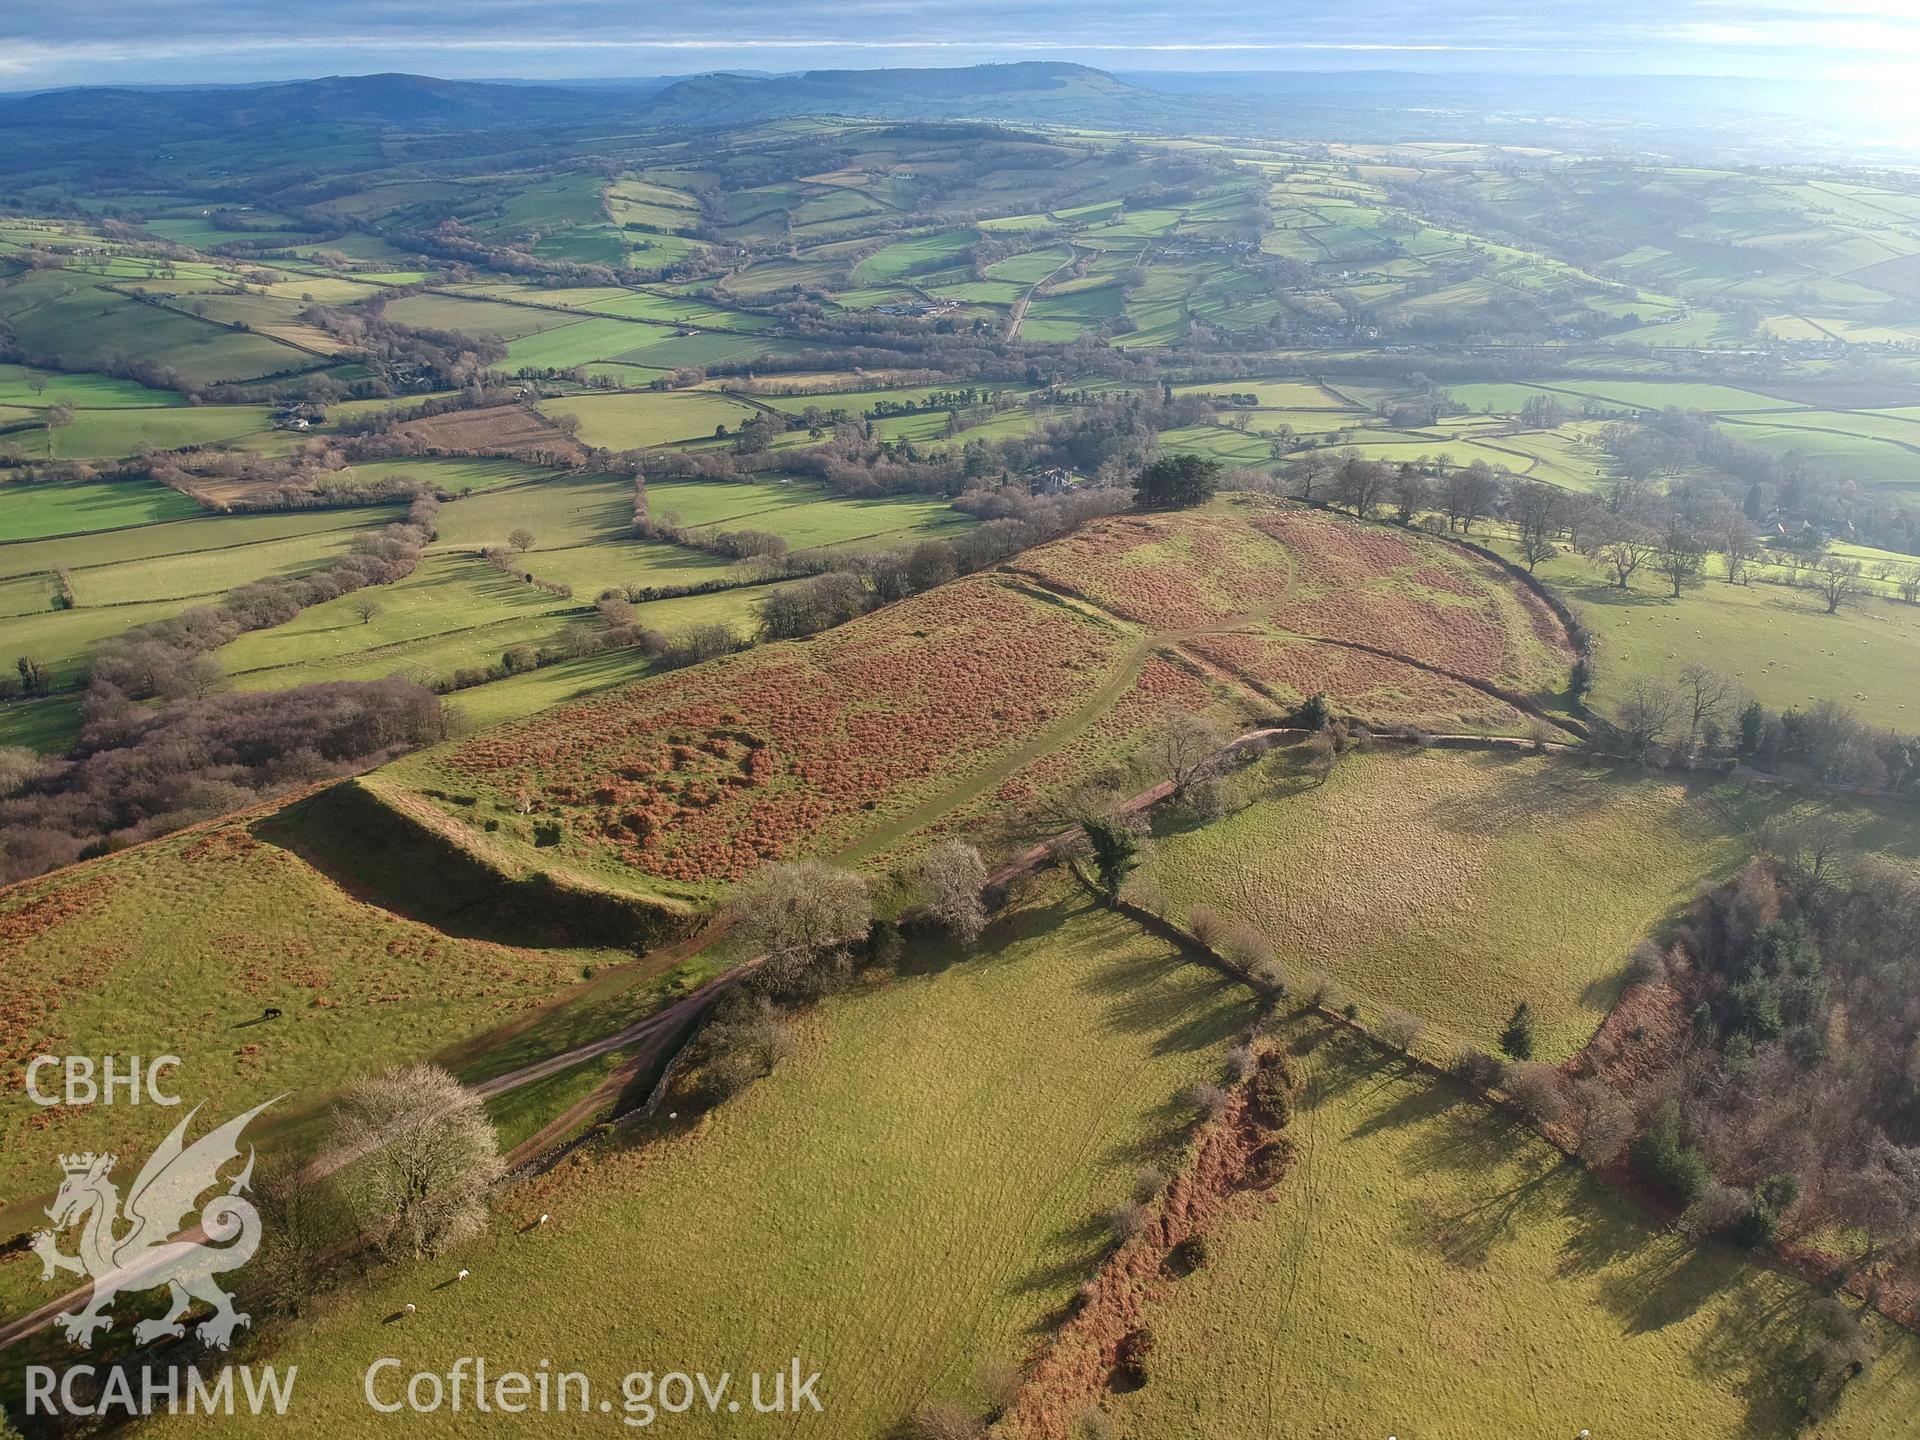 Aerial view of Pen-twyn Camp, Crucorney. Colour photograph taken by Paul R. Davis on 1st January 2019.